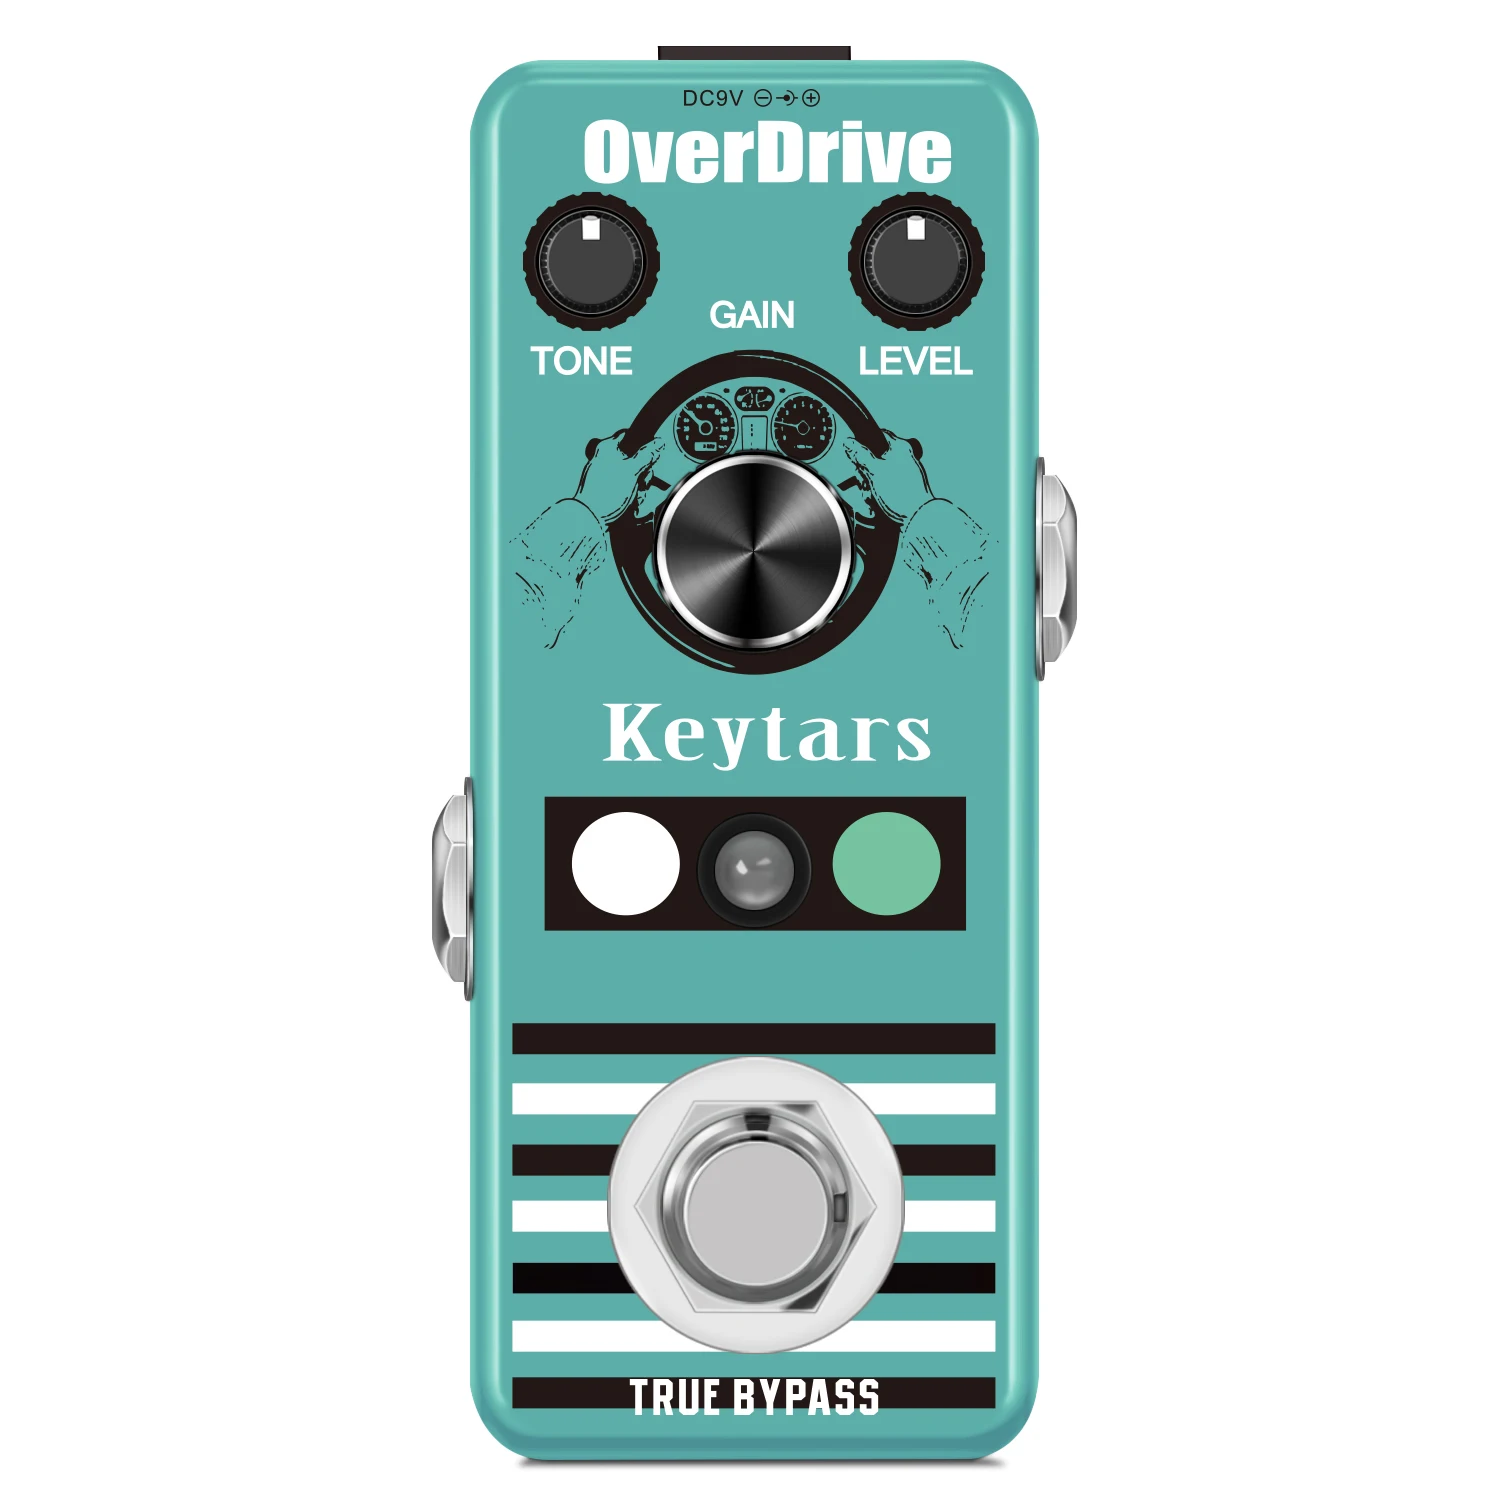 

Keytars LEF-302A Guitar Overdrive Effect Pedal Analog Classic Blues Style With Bright And Wild Sound Ture Bypass Full Metal Case